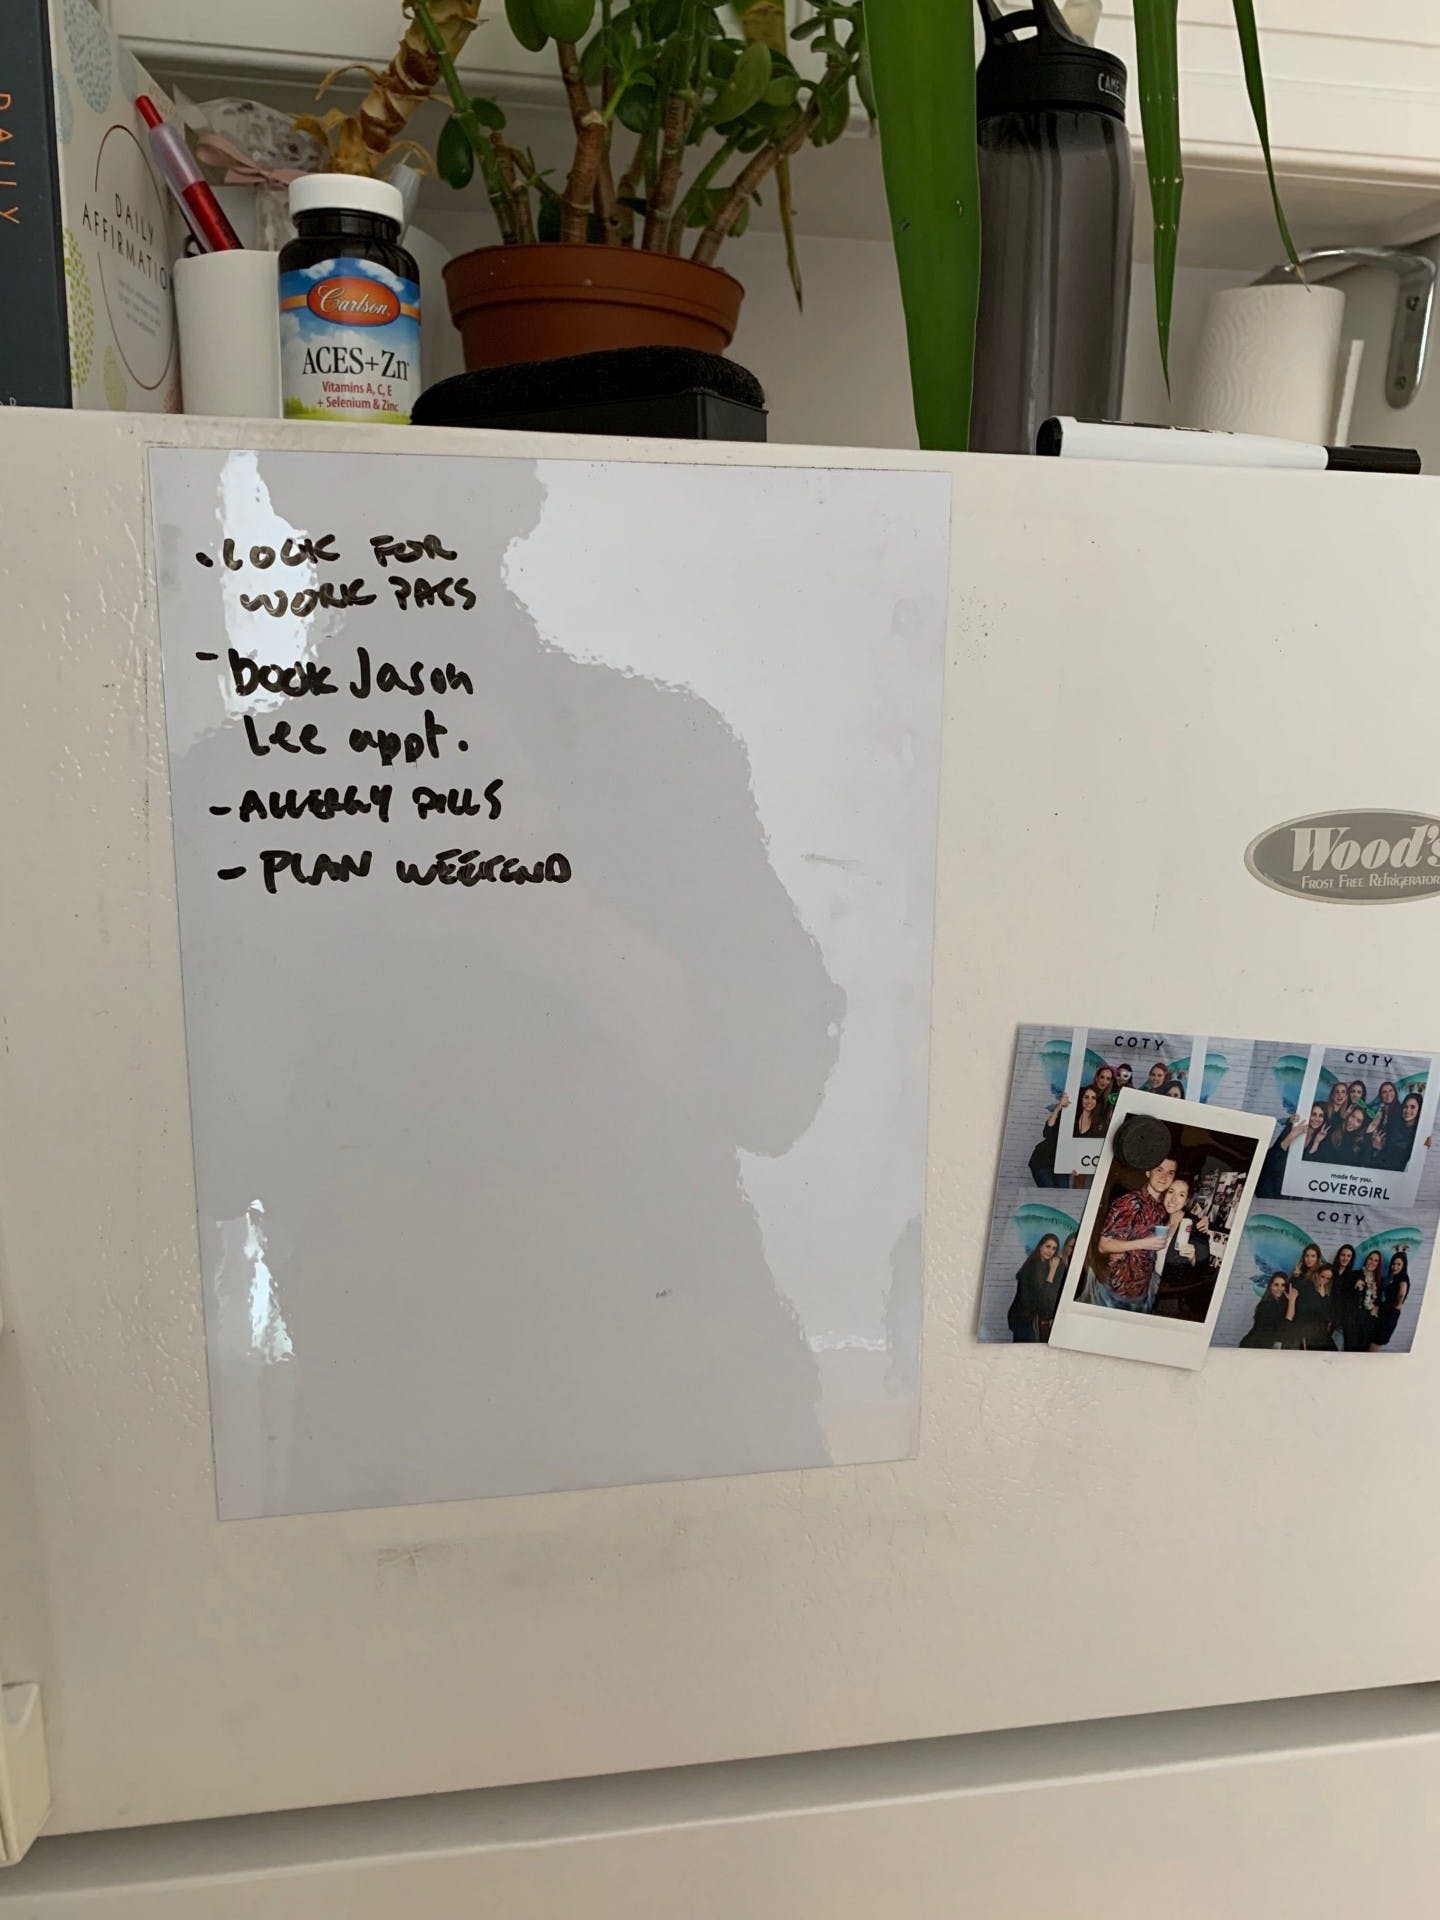 I should probably add “clean fridge” as a to-do…